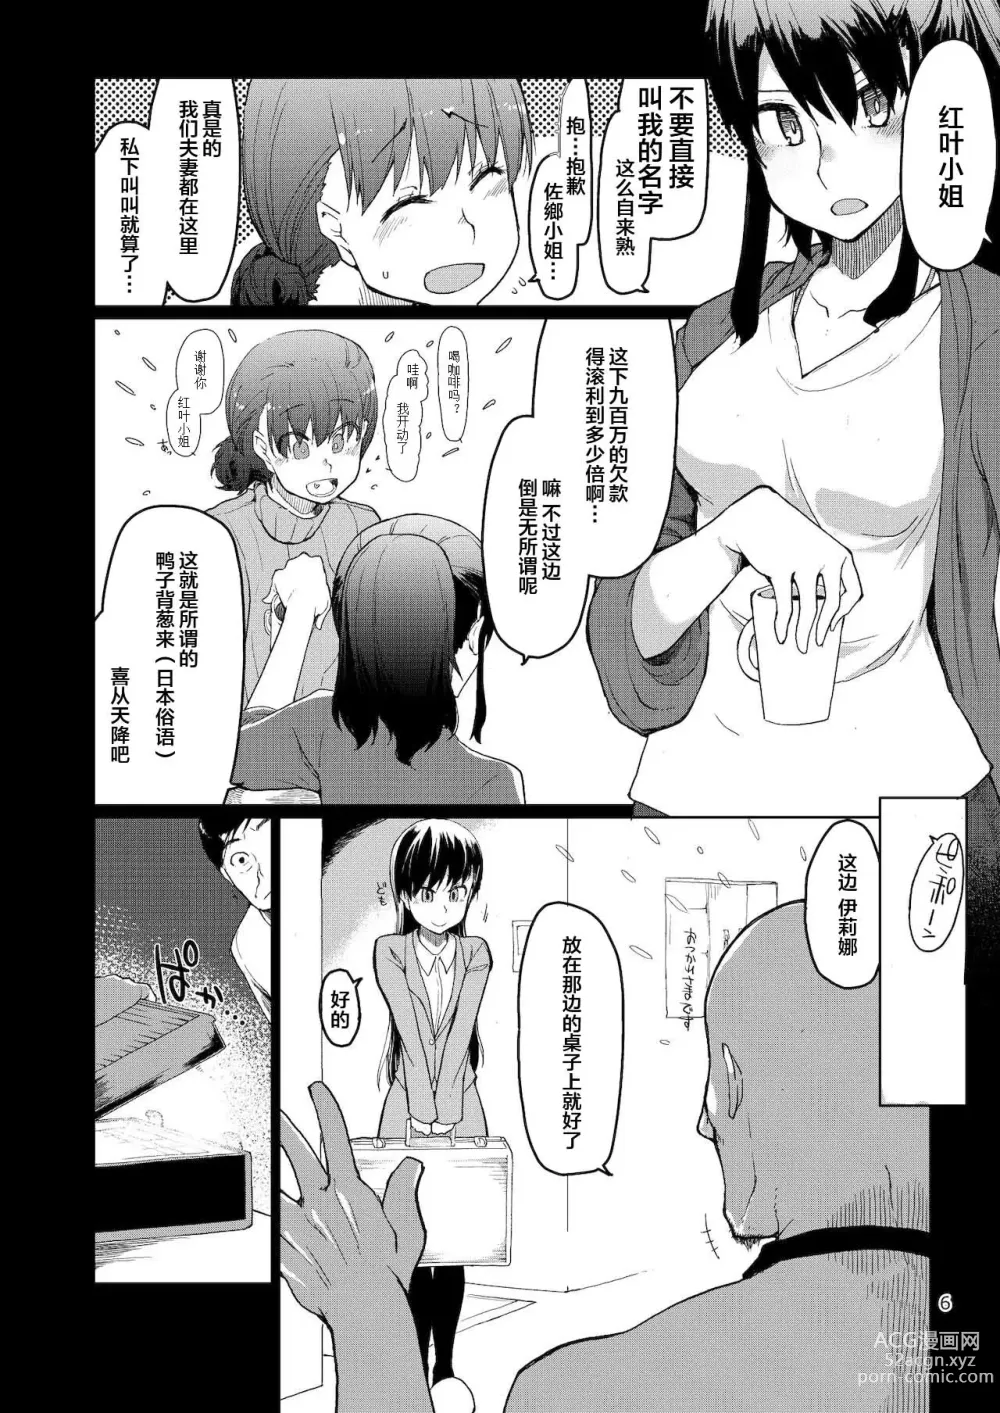 Page 7 of doujinshi SYG -Sell your girlfriend-2